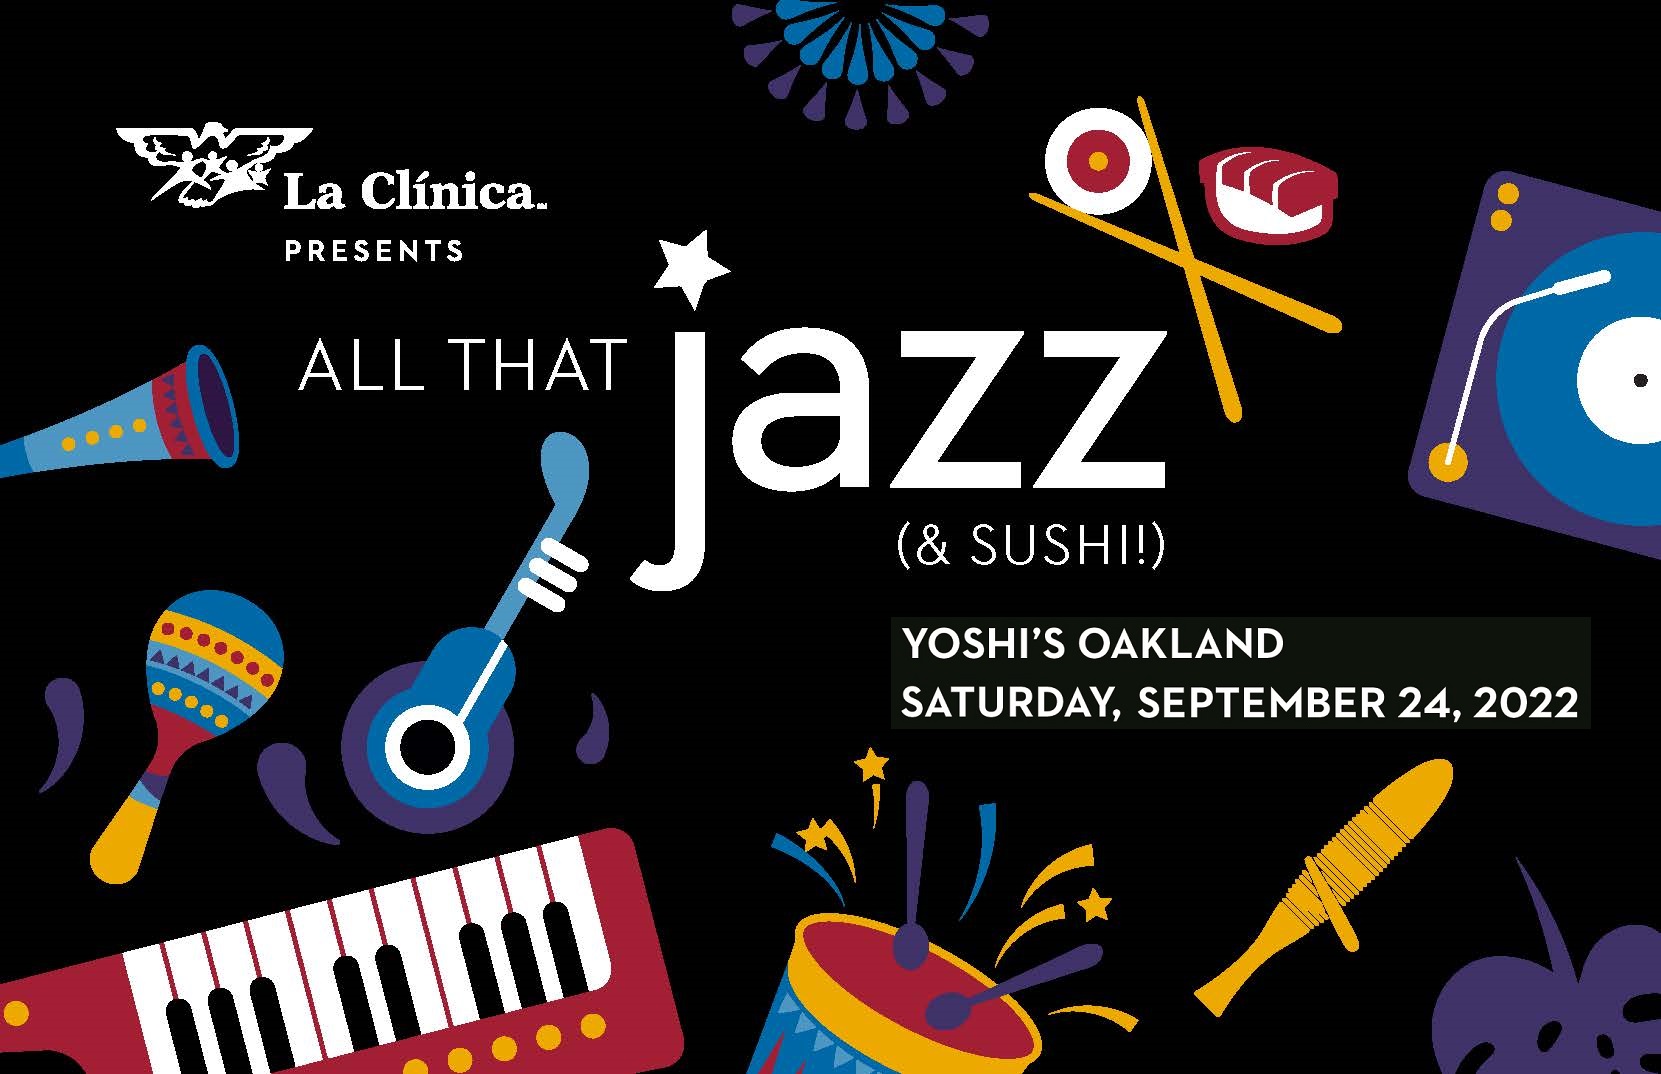 Image for LA CLINICA'S ALL THAT JAZZ (& SUSHI!)